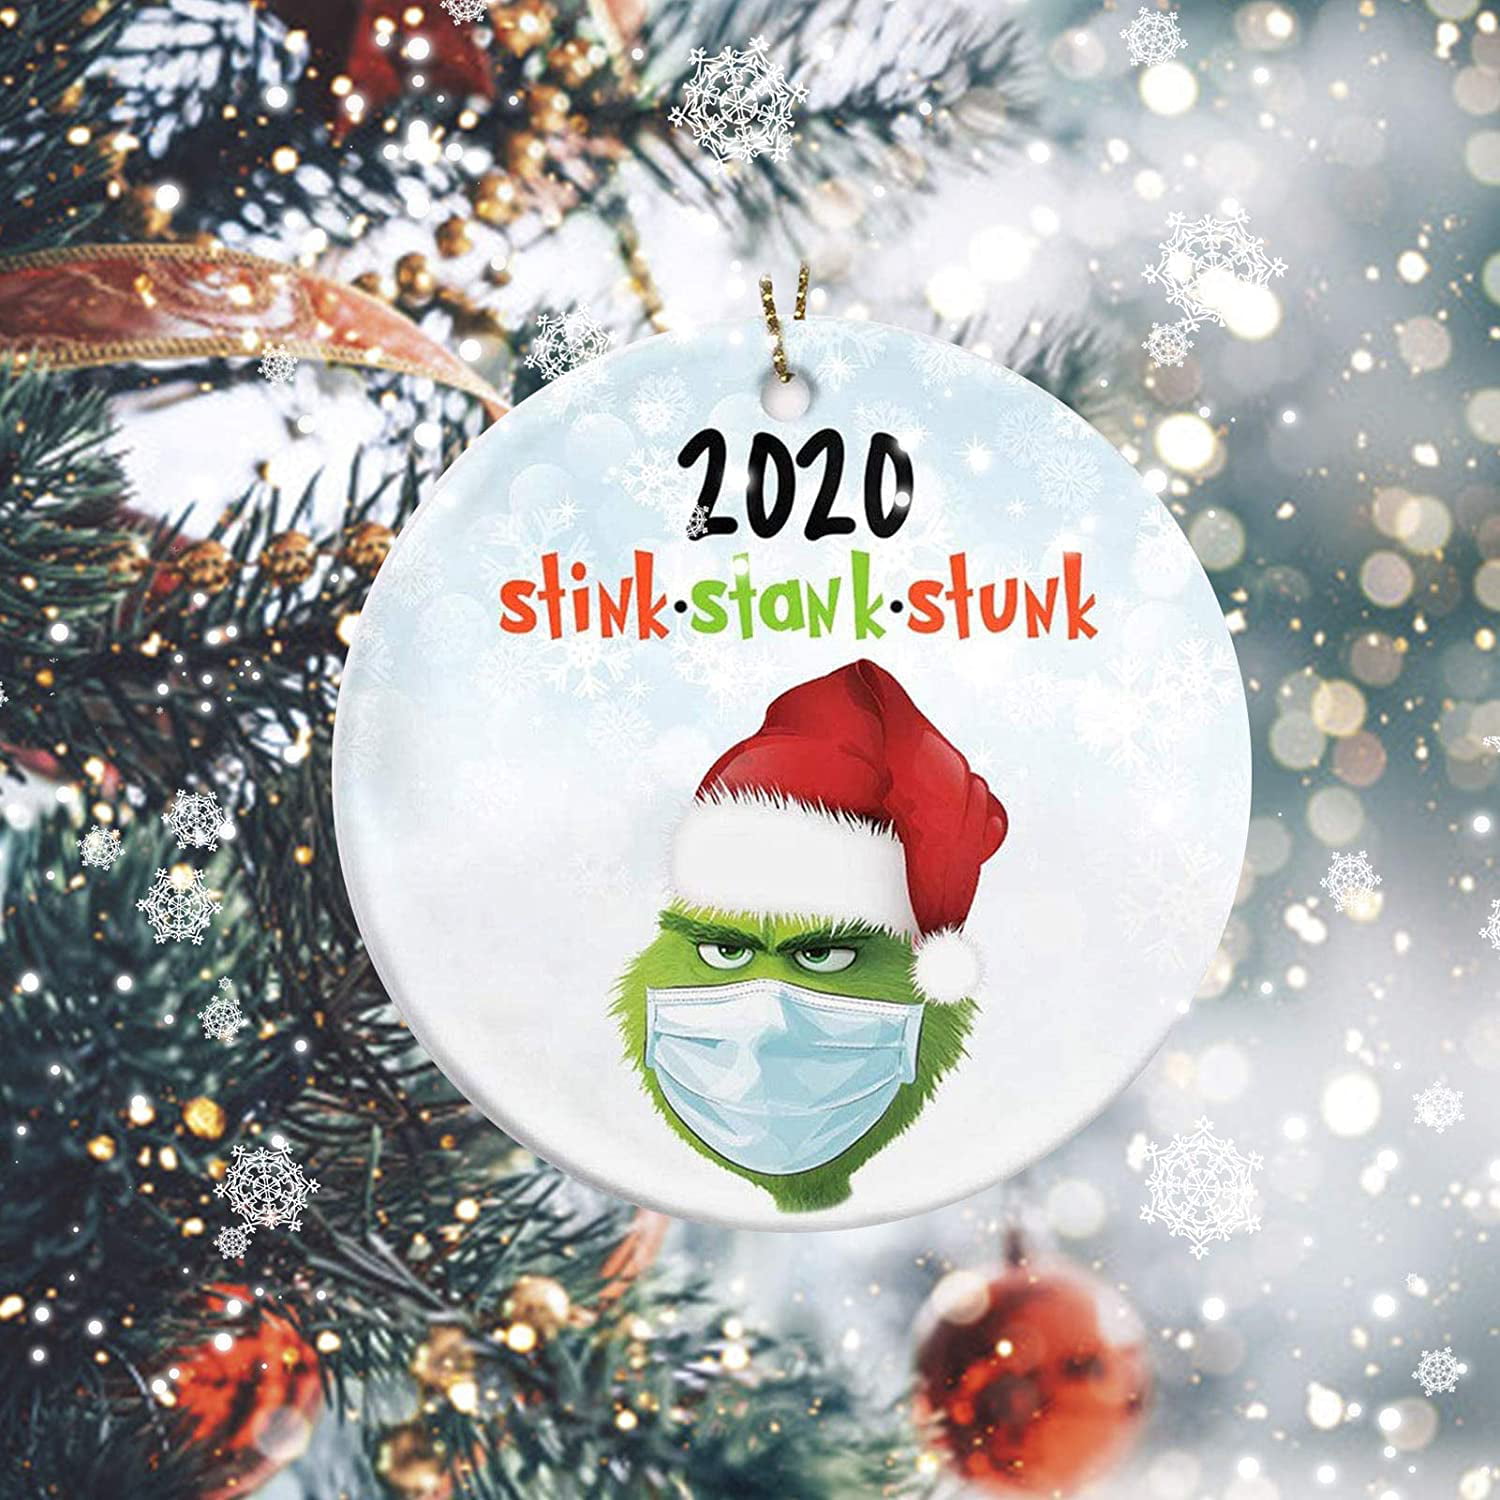 Double Sized Christmas Decorations with Nice Package Grinch Ornaments 2020 Stink Stank Stunk Ornamen for Christmas Tree